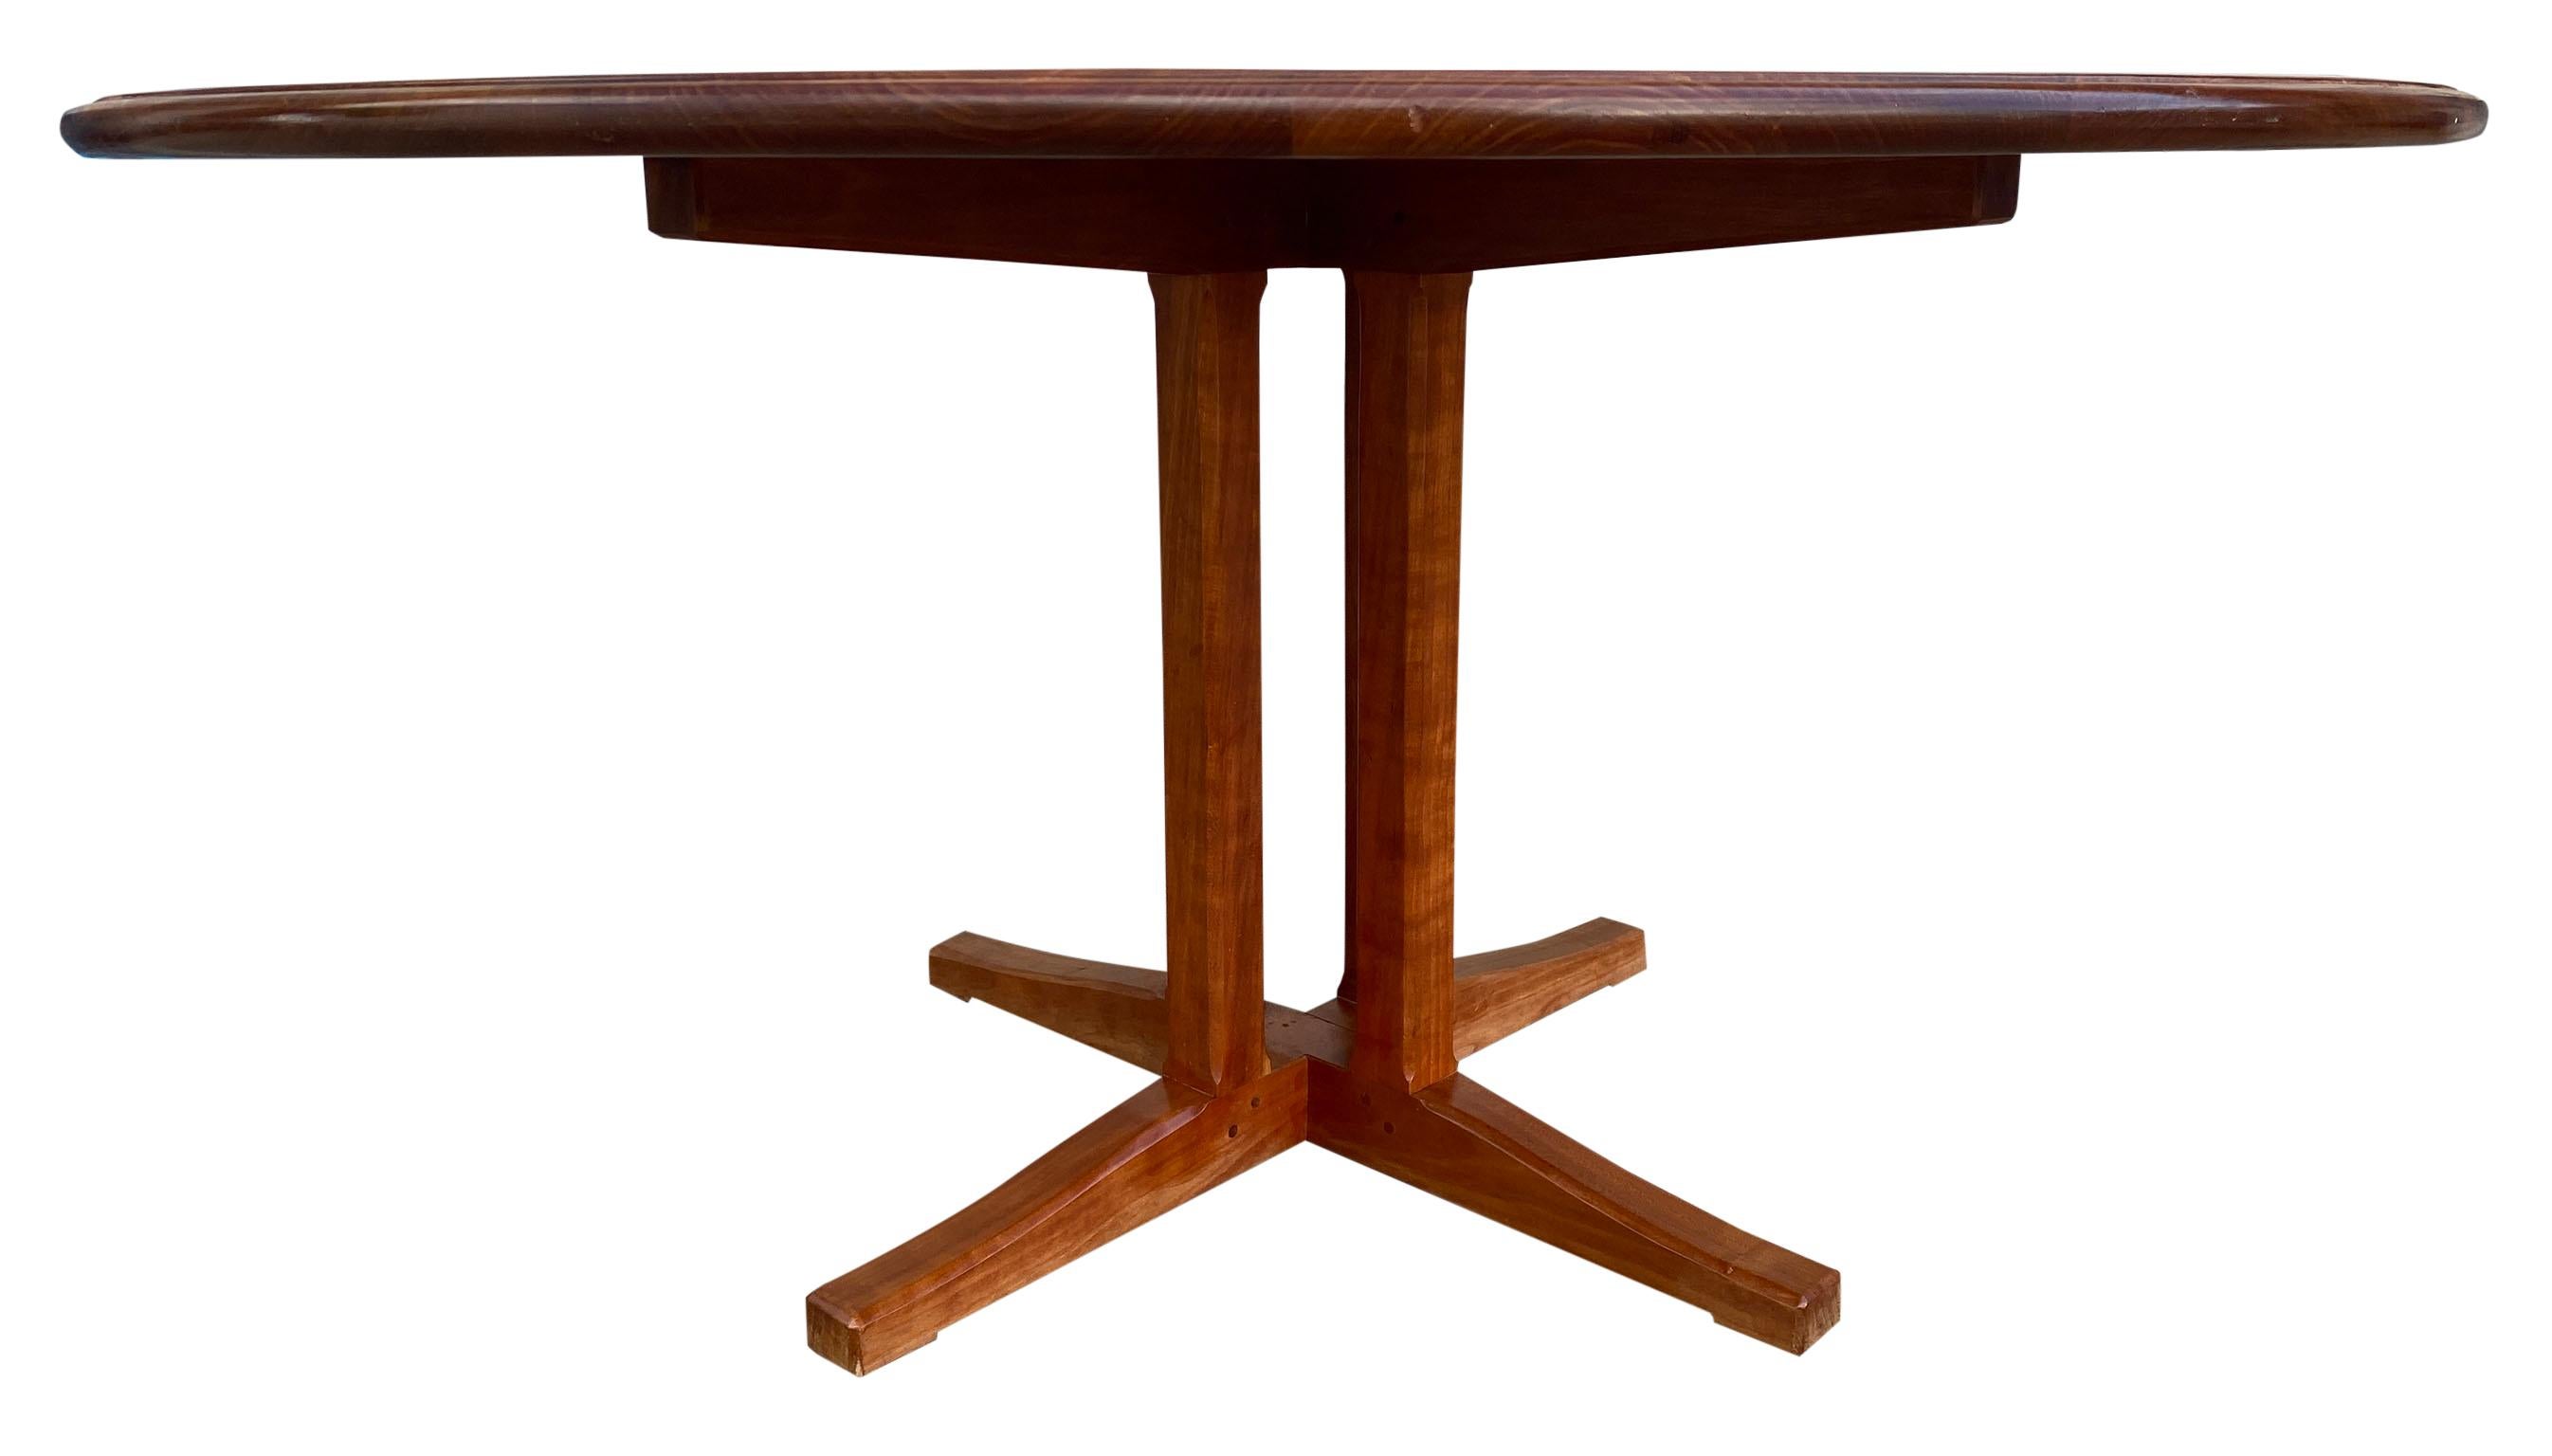 Stunning studio craft round solid cherry dining table by Charles Shackleton made in Vermont, circa 1995. Stamped DR - beautiful handcrafted dining table. Beautiful solid cherry cluster base and 1.250